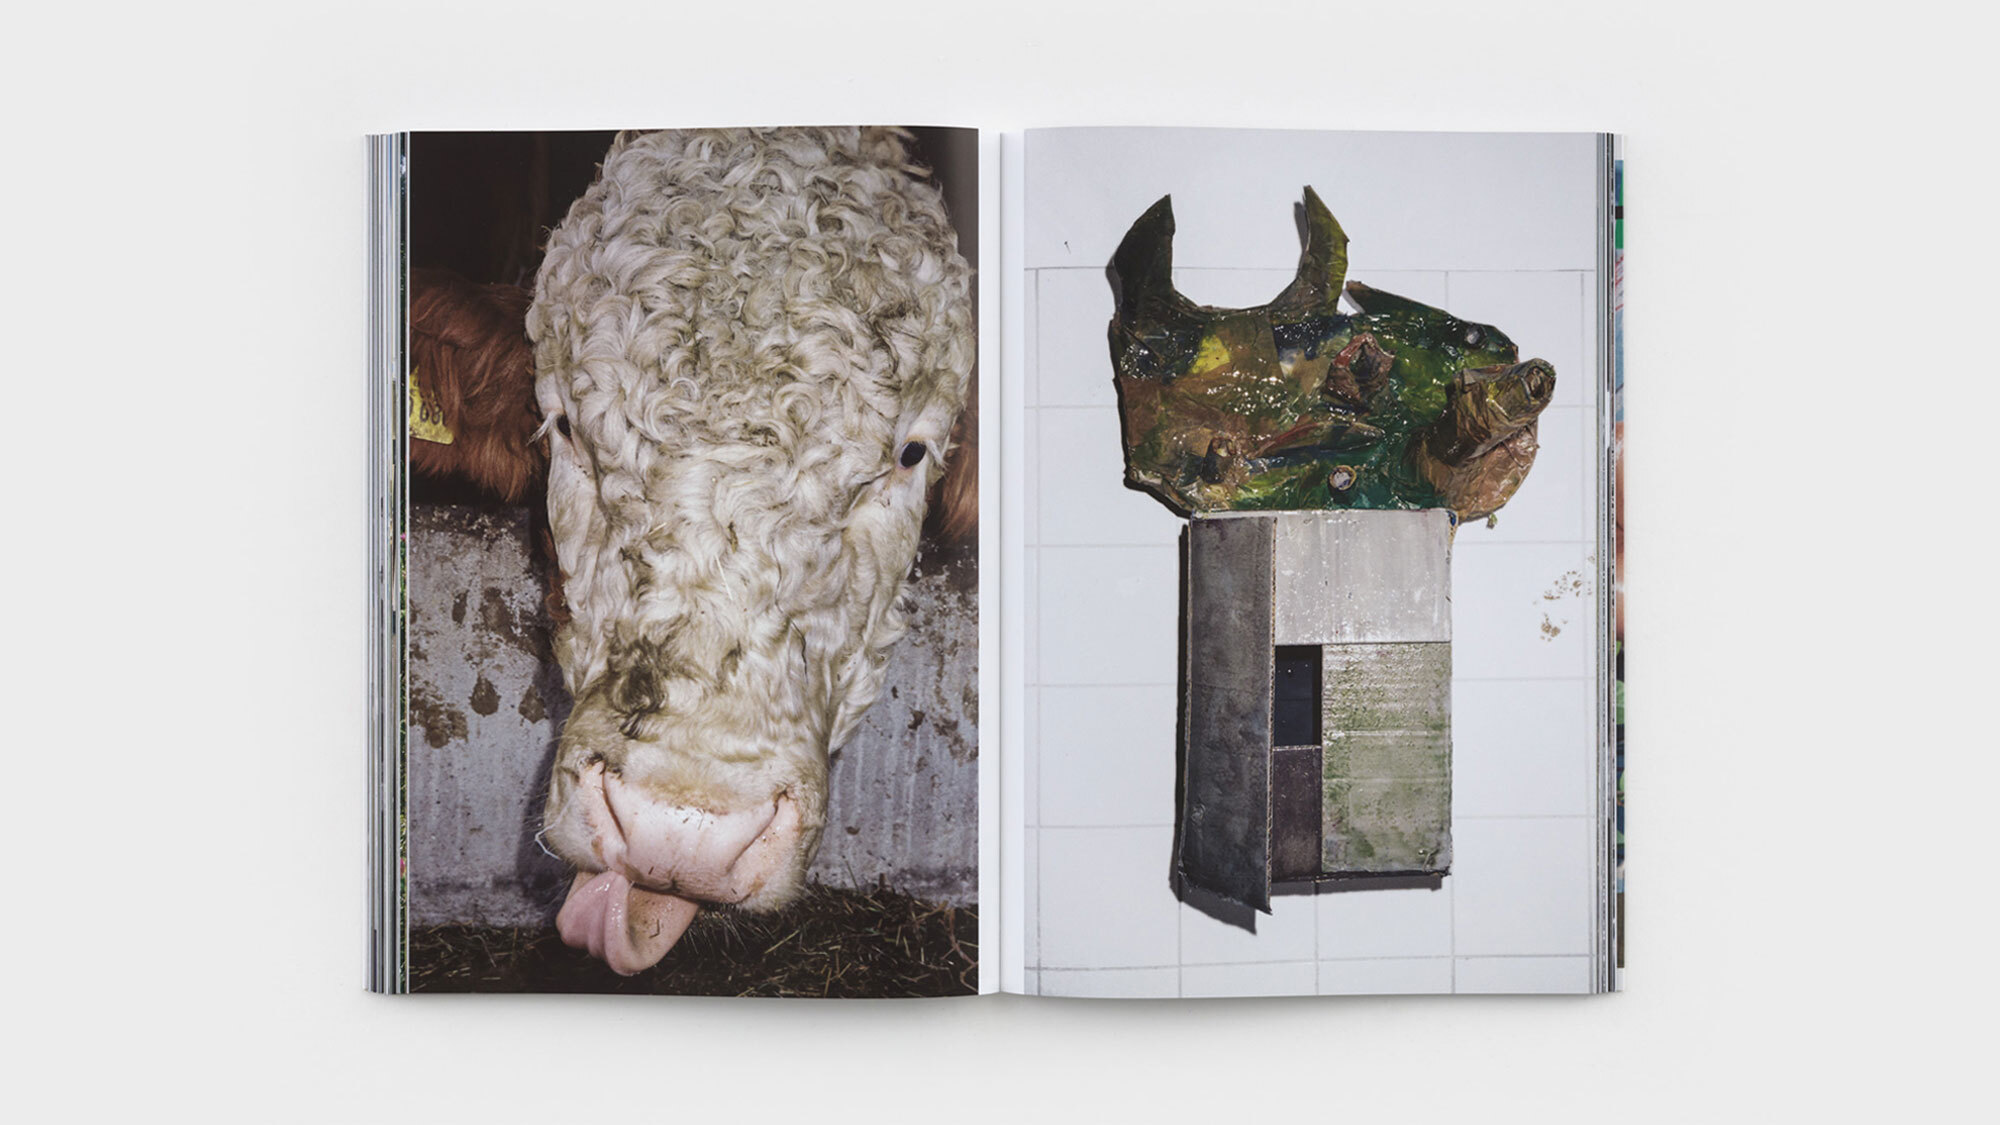 Another full-bleed image pair. On the left is a photograph of a white cow in the midst of licking something. Its eyes are black and its face ornamented with curls of white fur. On the right is one of Machteld's wall-mounted boxes, with its left fold agape just so.